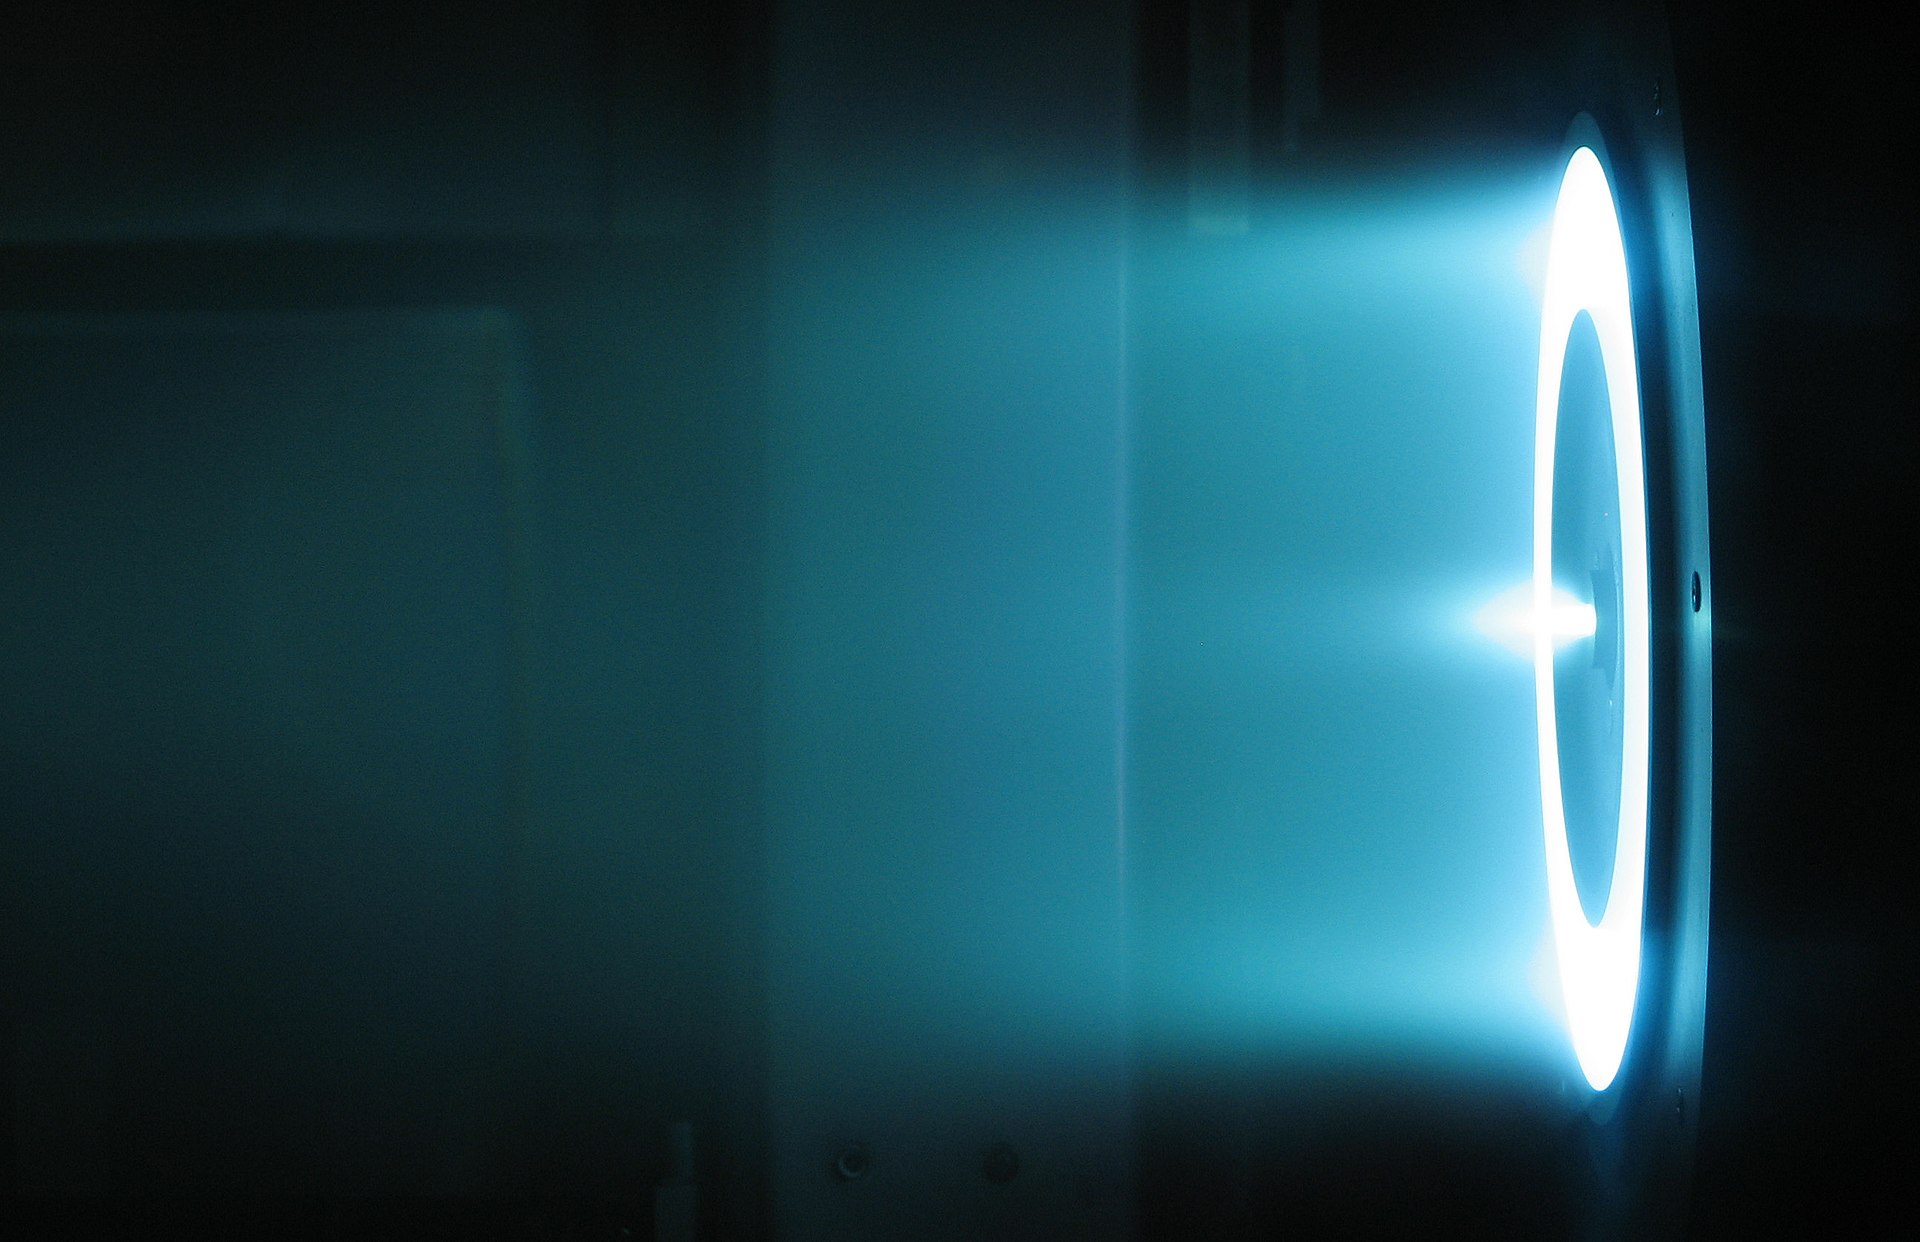 A solar electric propulsion Hall Effect thruster being tested under vacuum conditions at NASA